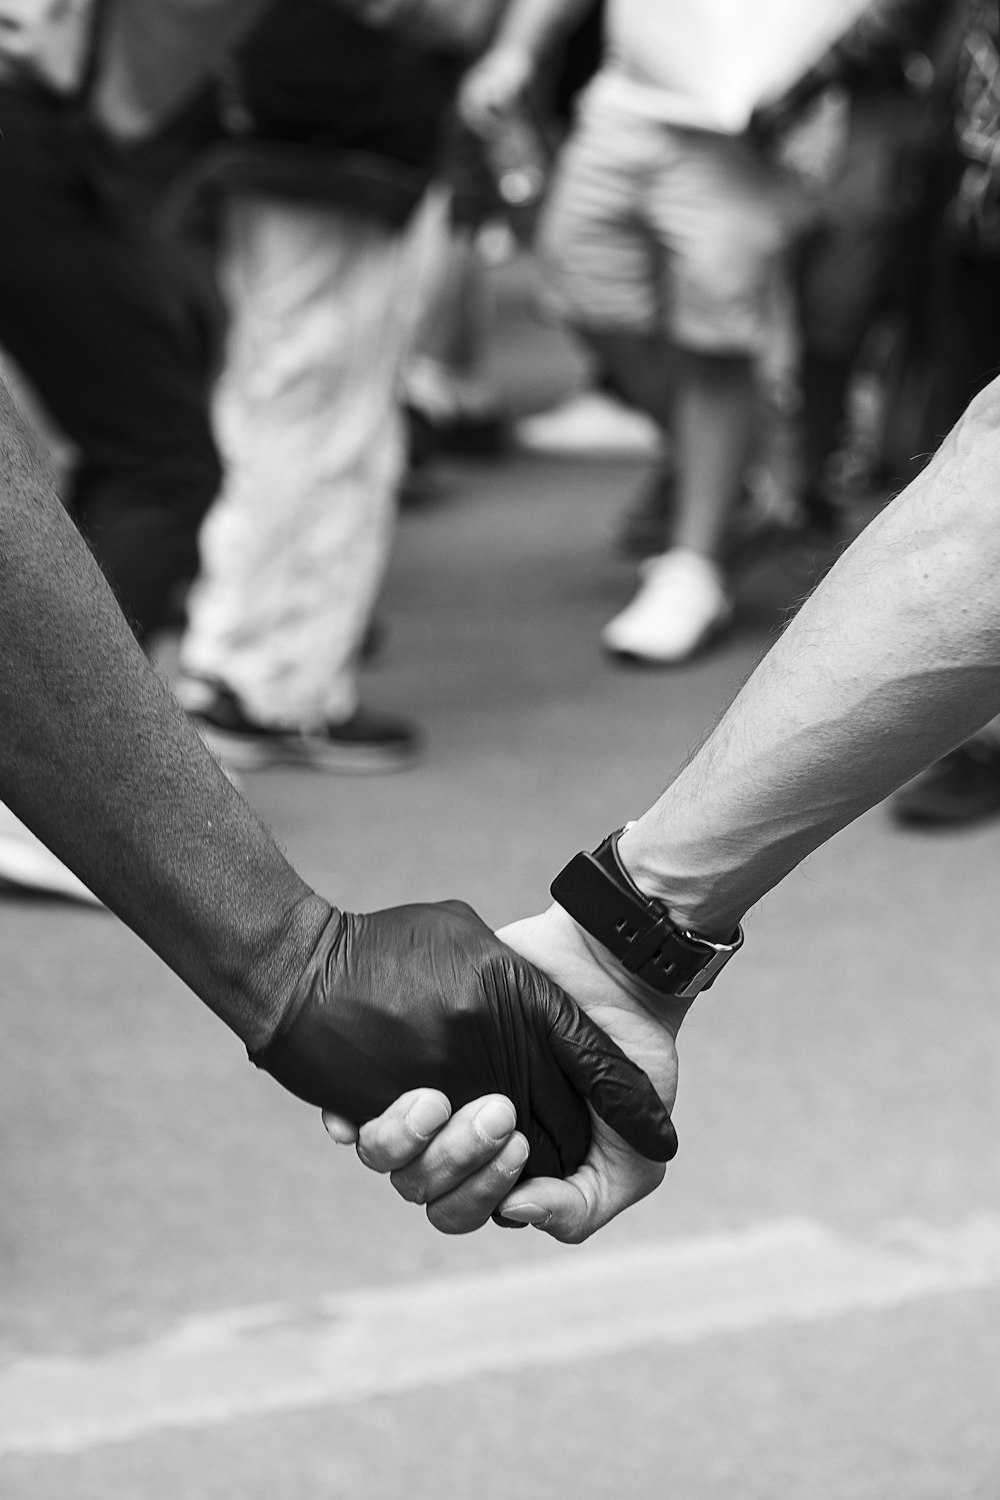 grayscale photo of man and woman holding hands